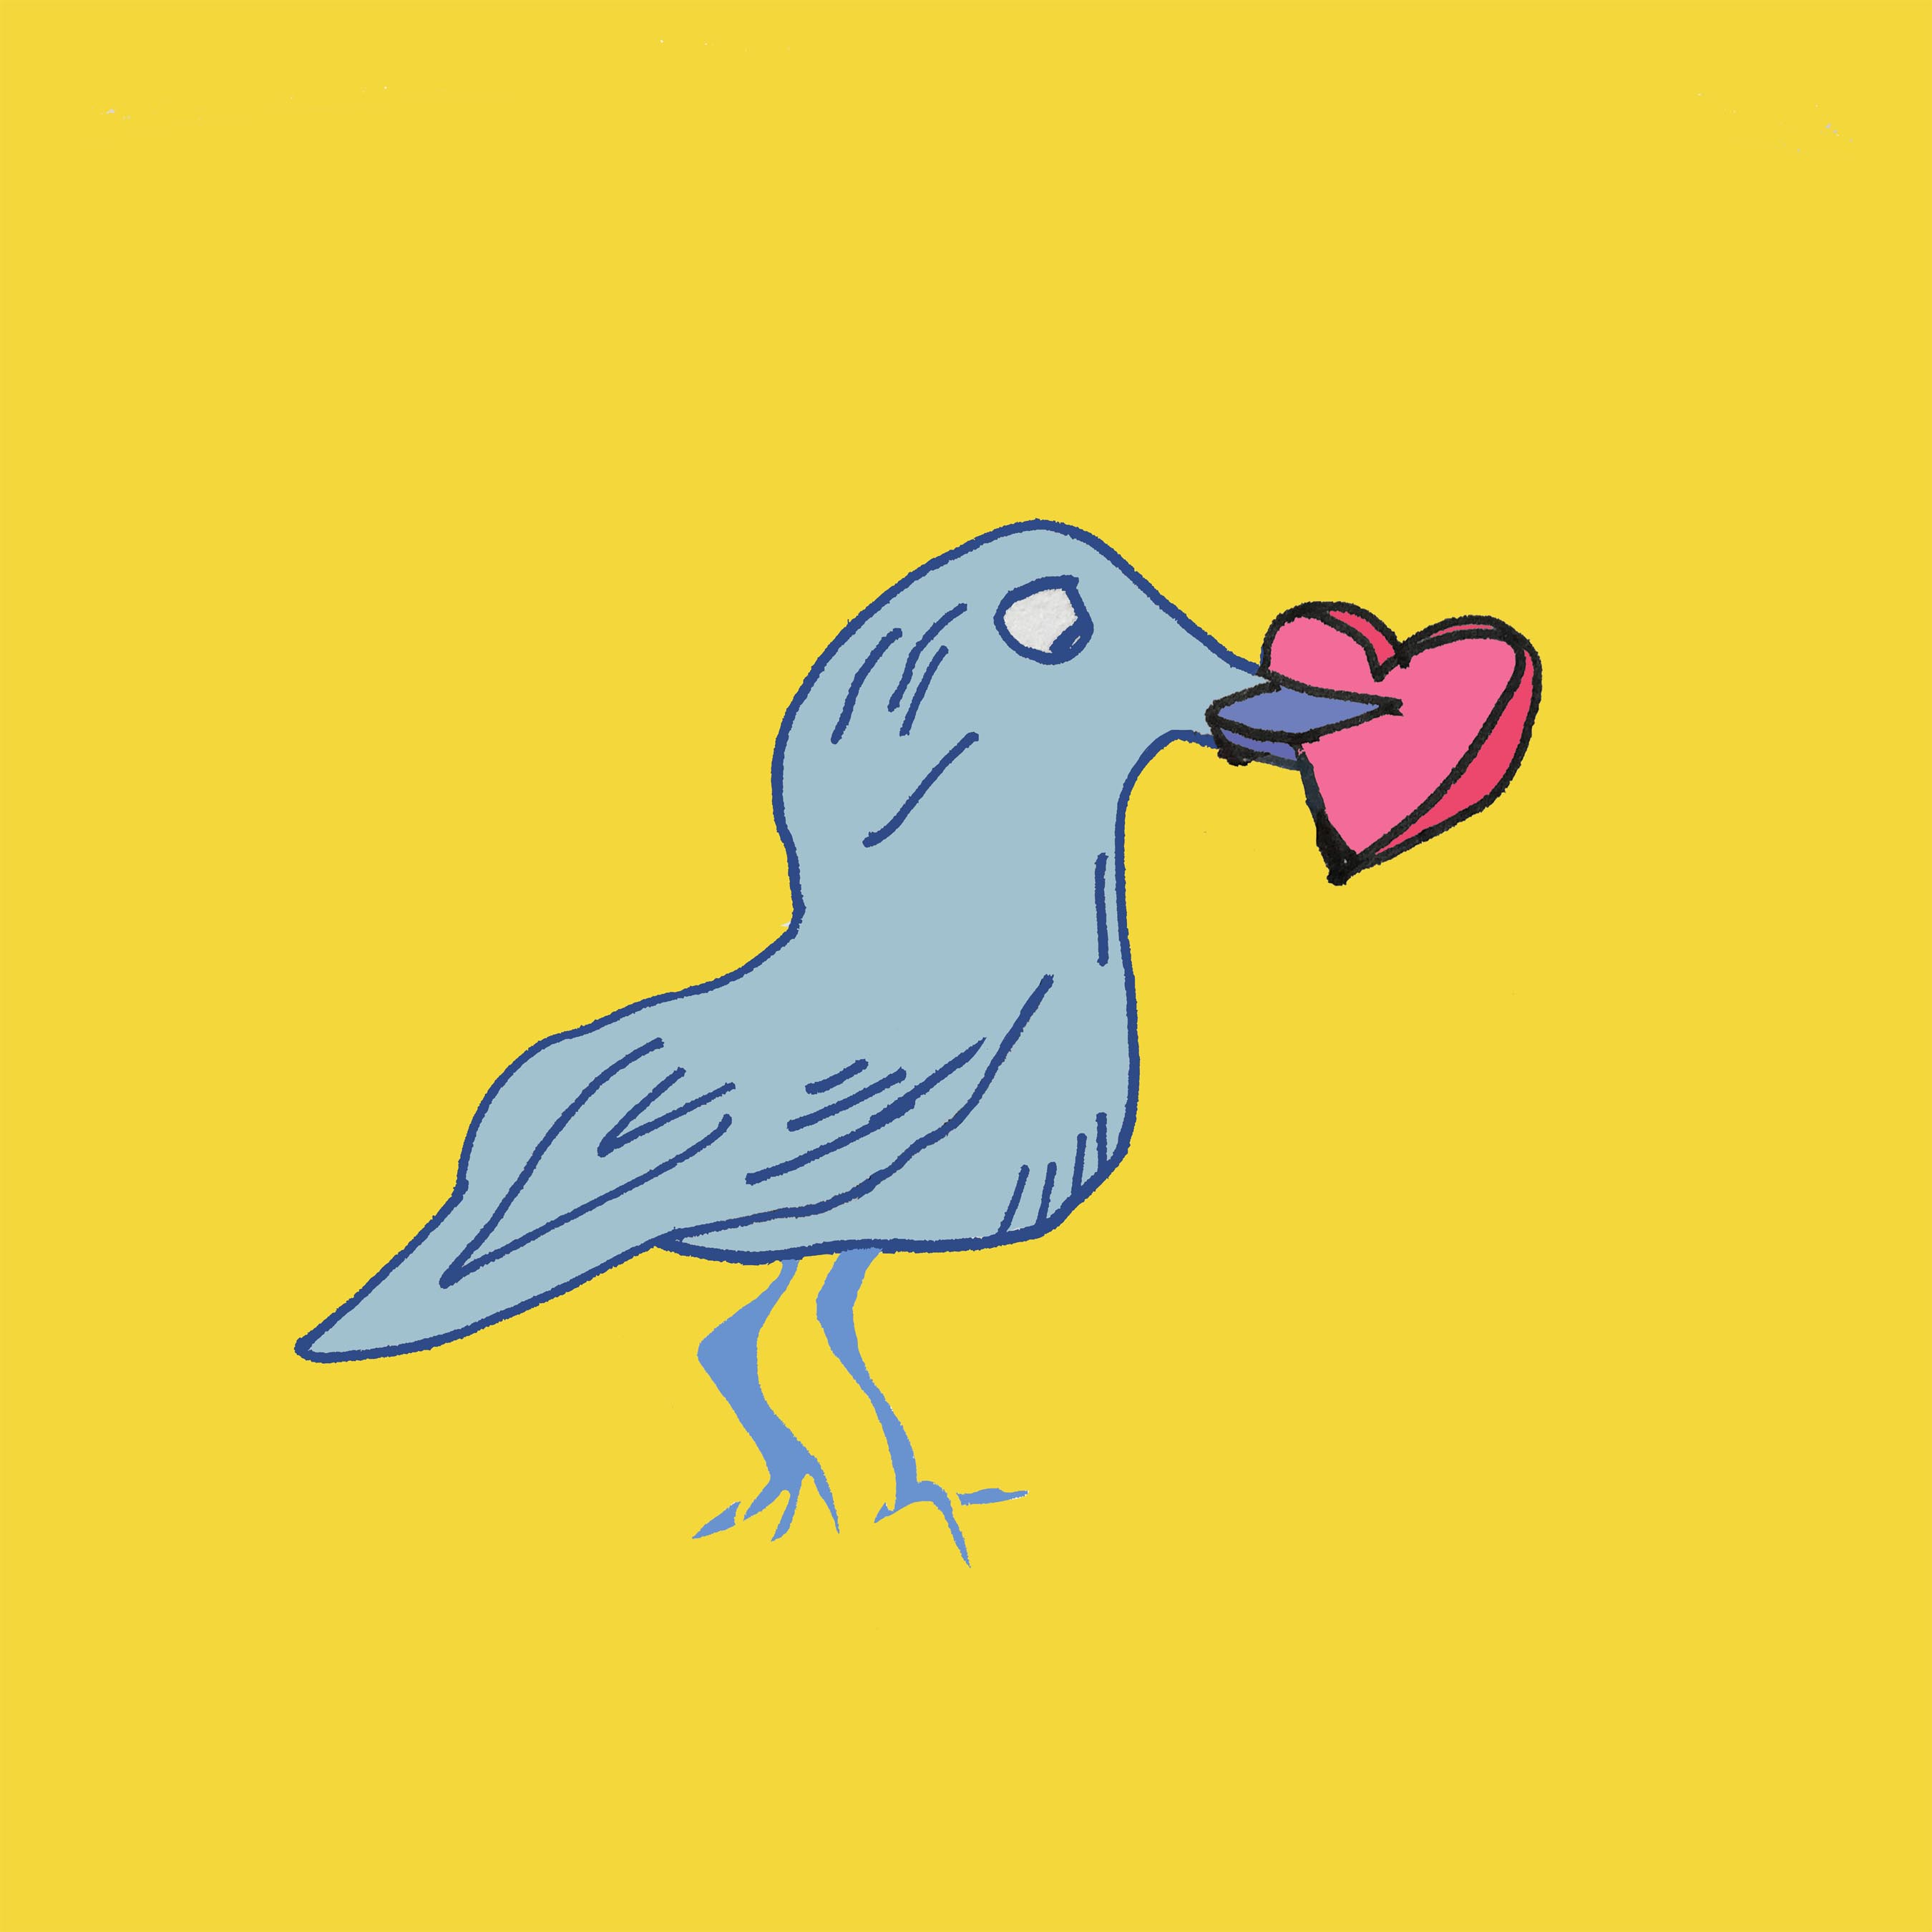 art every day number 304 / illustration / crow with heart